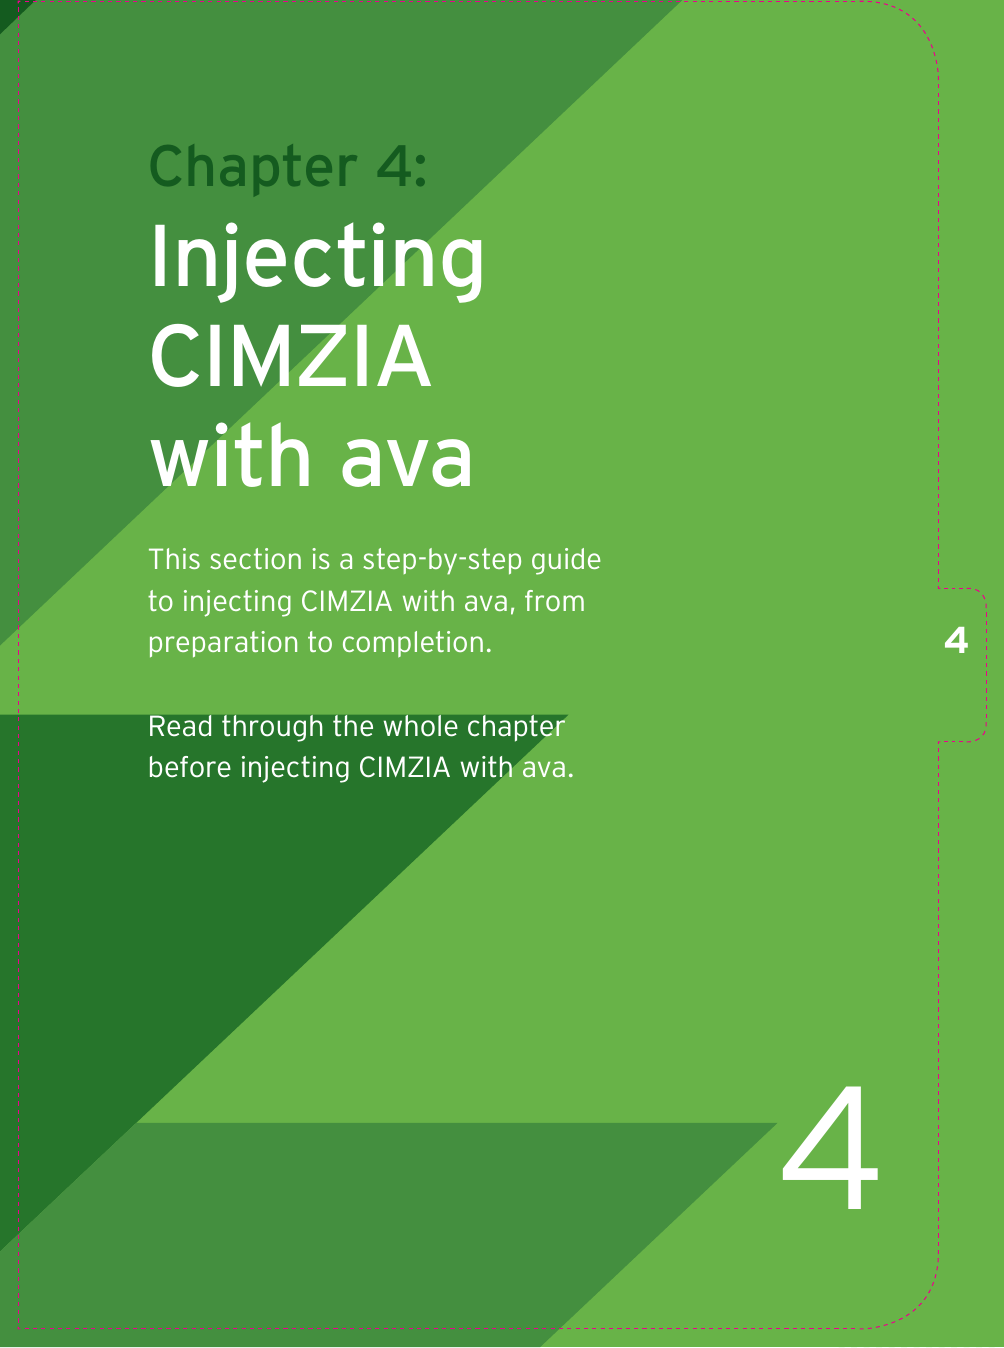 4 Chapter  4: Injecting CIMZIA with avaThis section is a step-by-step guide to injecting CIMZIA with ava, from preparation to completion.Read through the whole chapter before injecting CIMZIA with ava.4